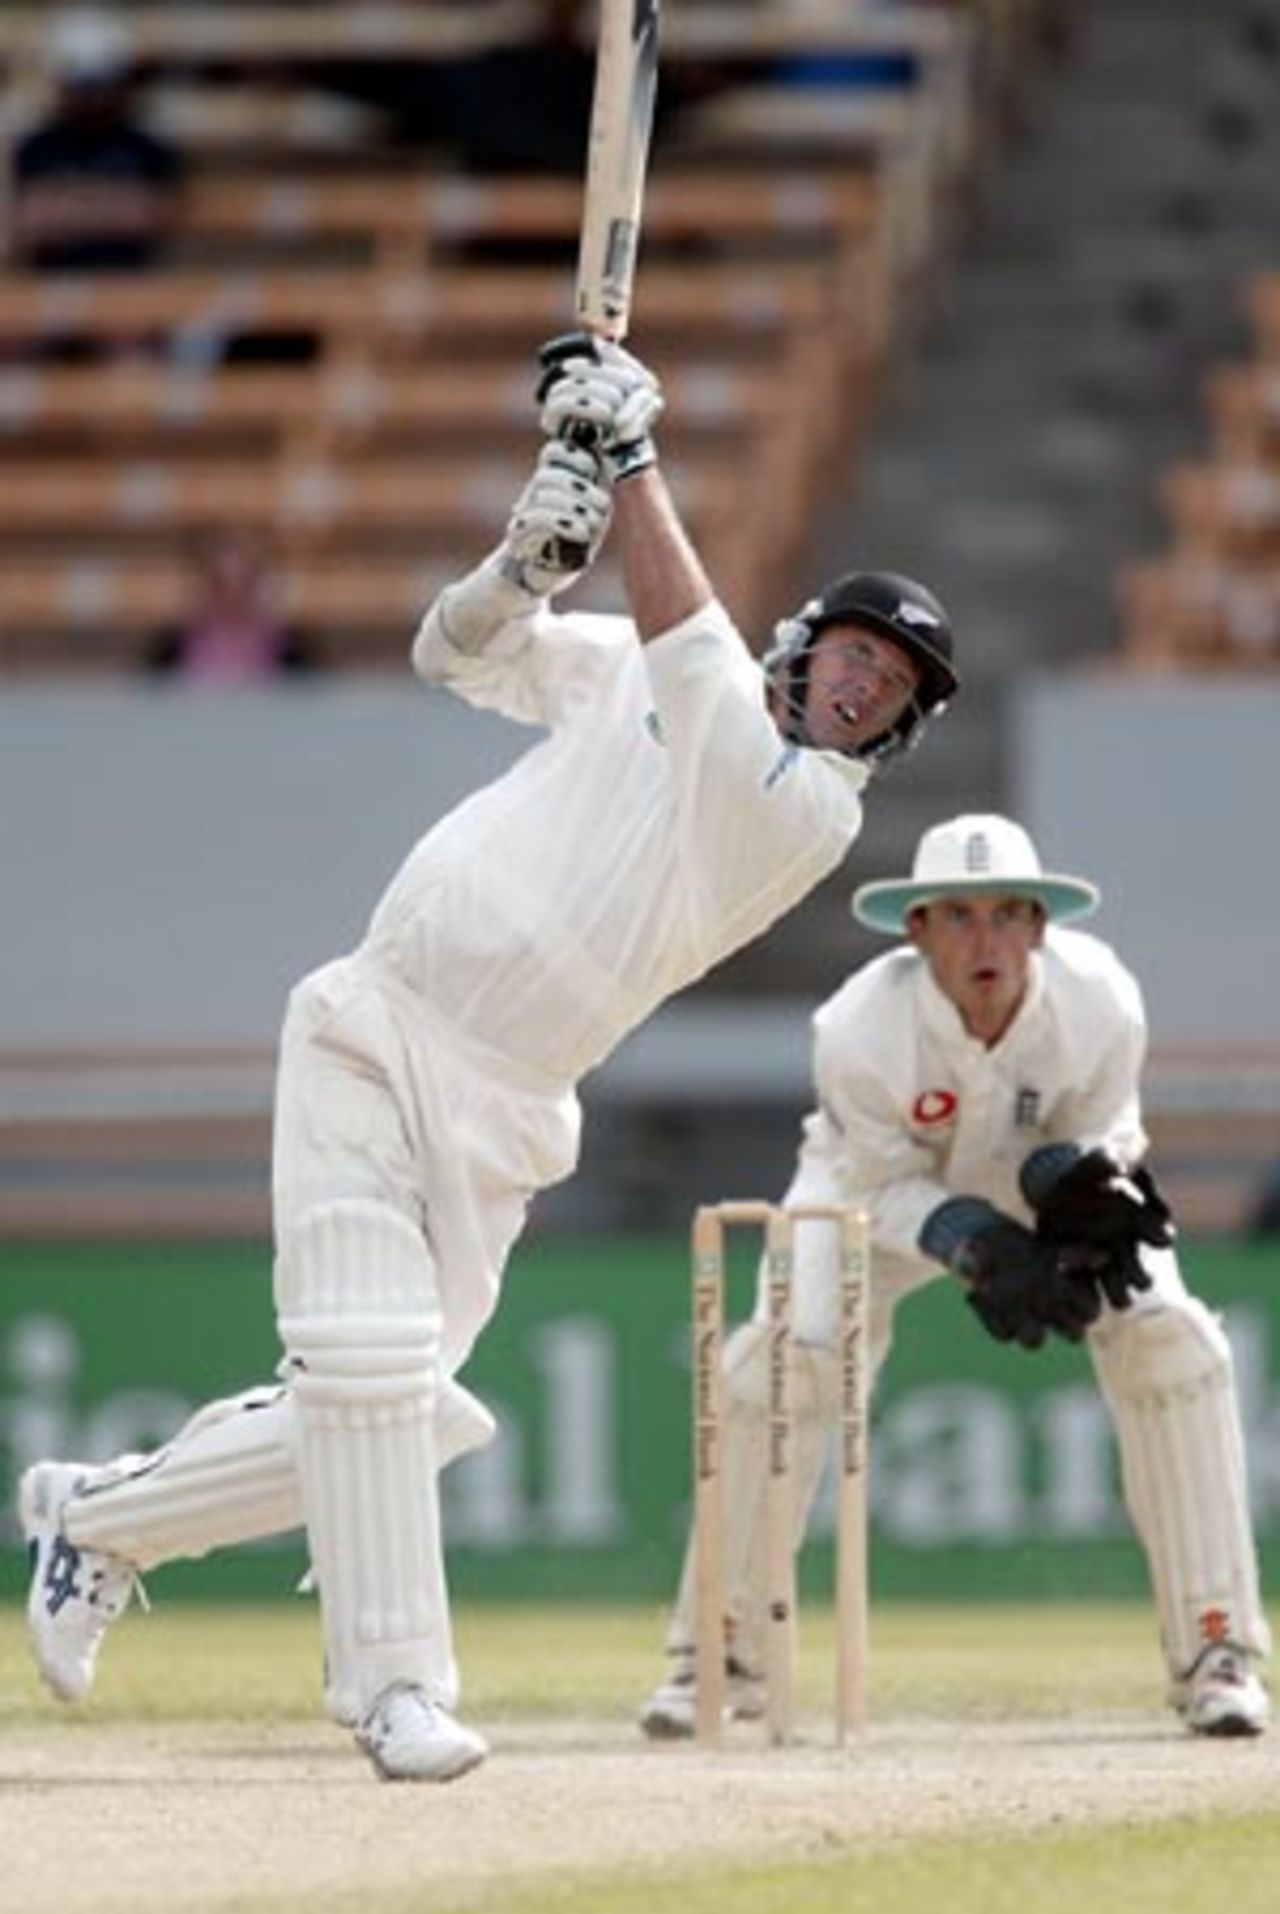 New Zealand batsman Mark Richardson lofts a delivery from England bowler Ashley Giles to the long off boundary while wicket-keeper James Foster looks on. Richardson scored 76 in his second innings. 1st Test: New Zealand v England at Jade Stadium, Christchurch, 13-17 March 2002 (16 March 2002).